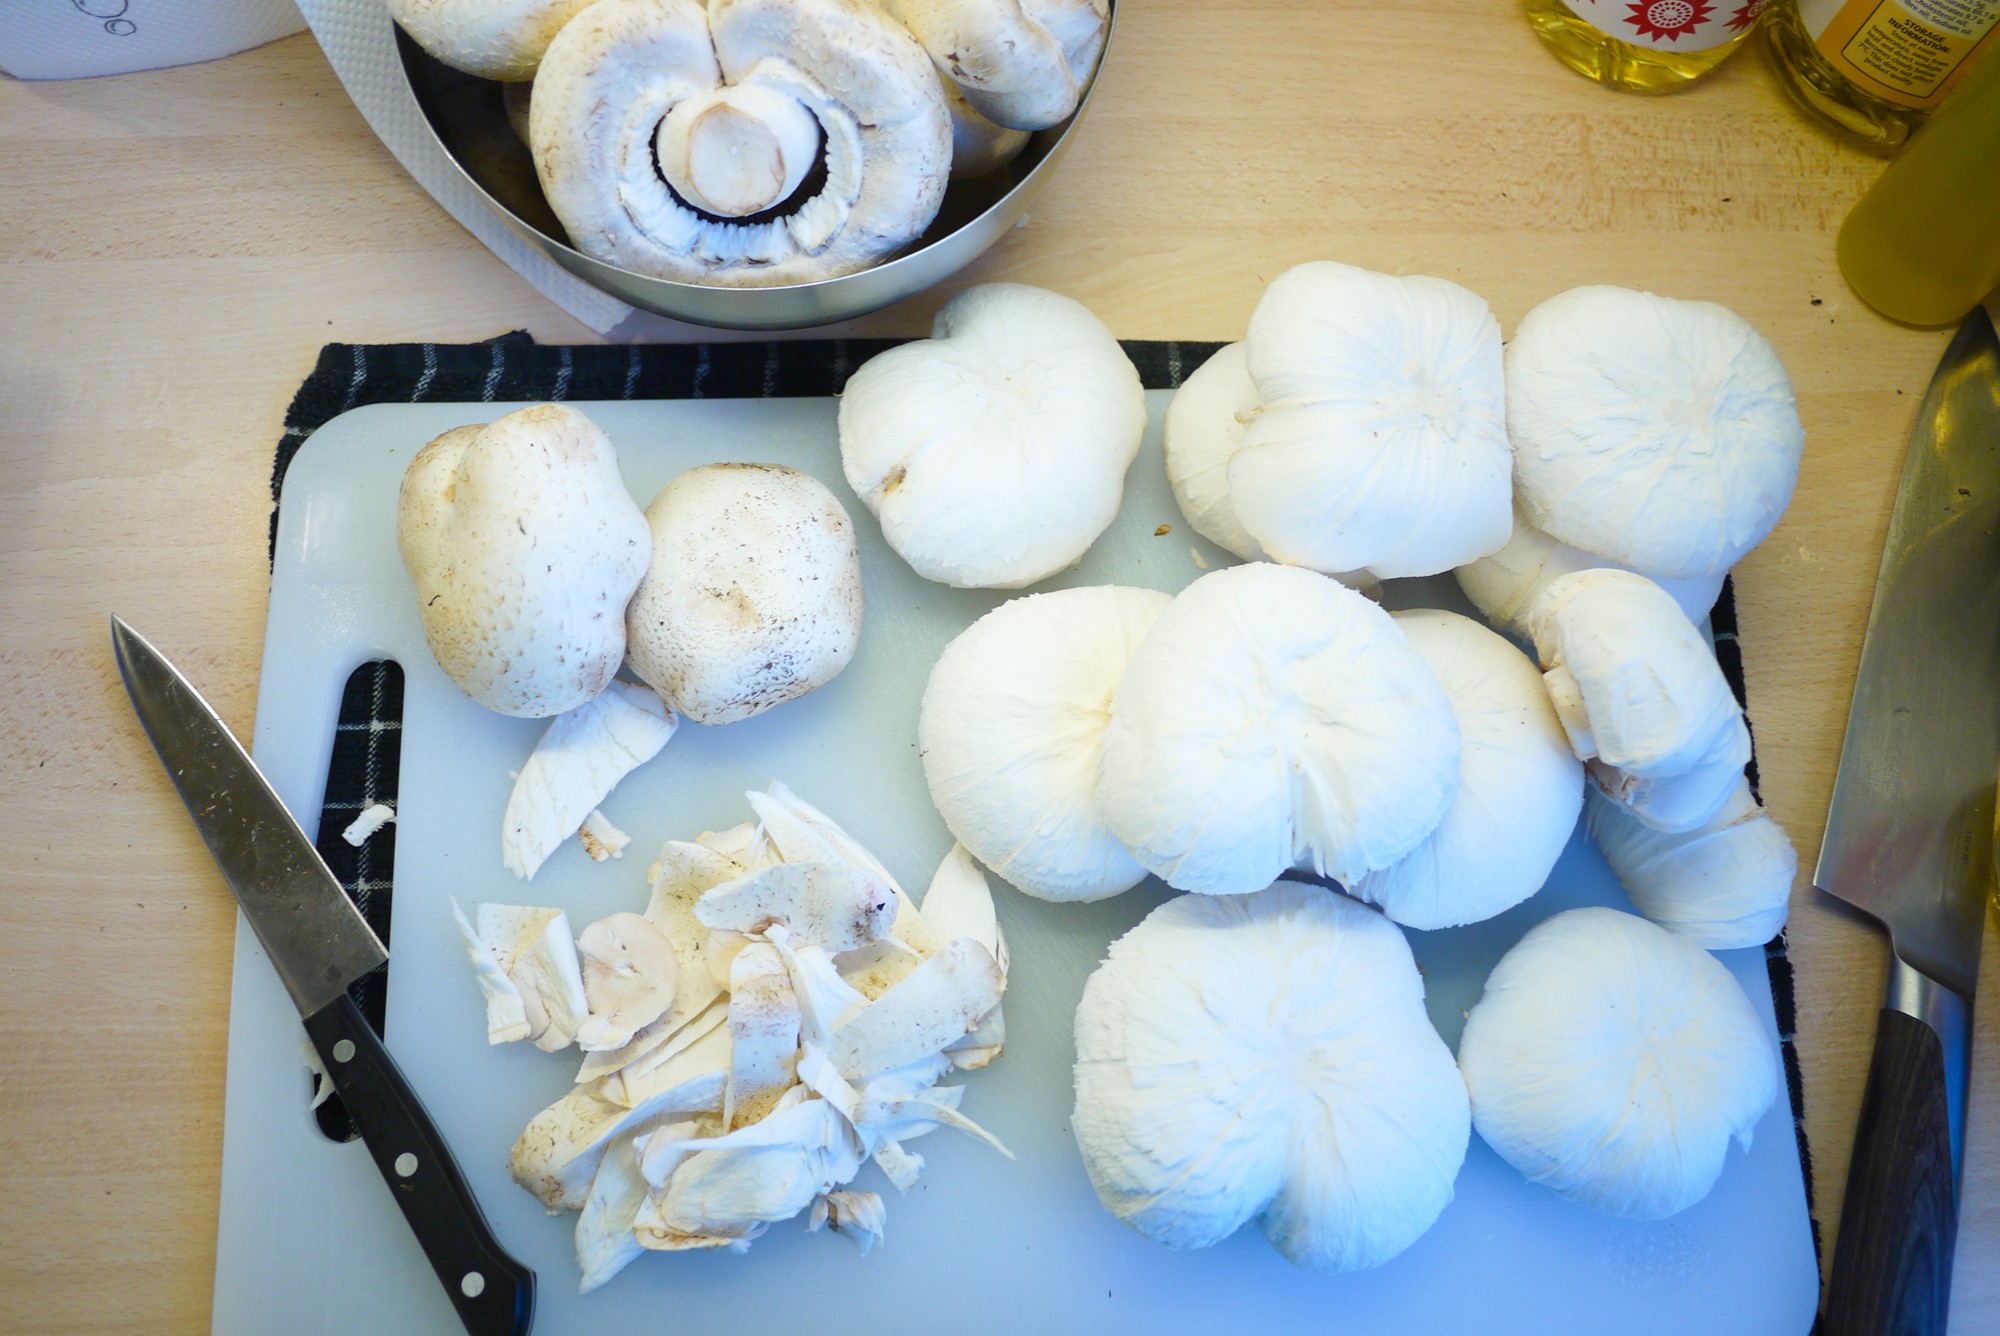 Only the best mushrooms for our Soil Tea Ceremony.